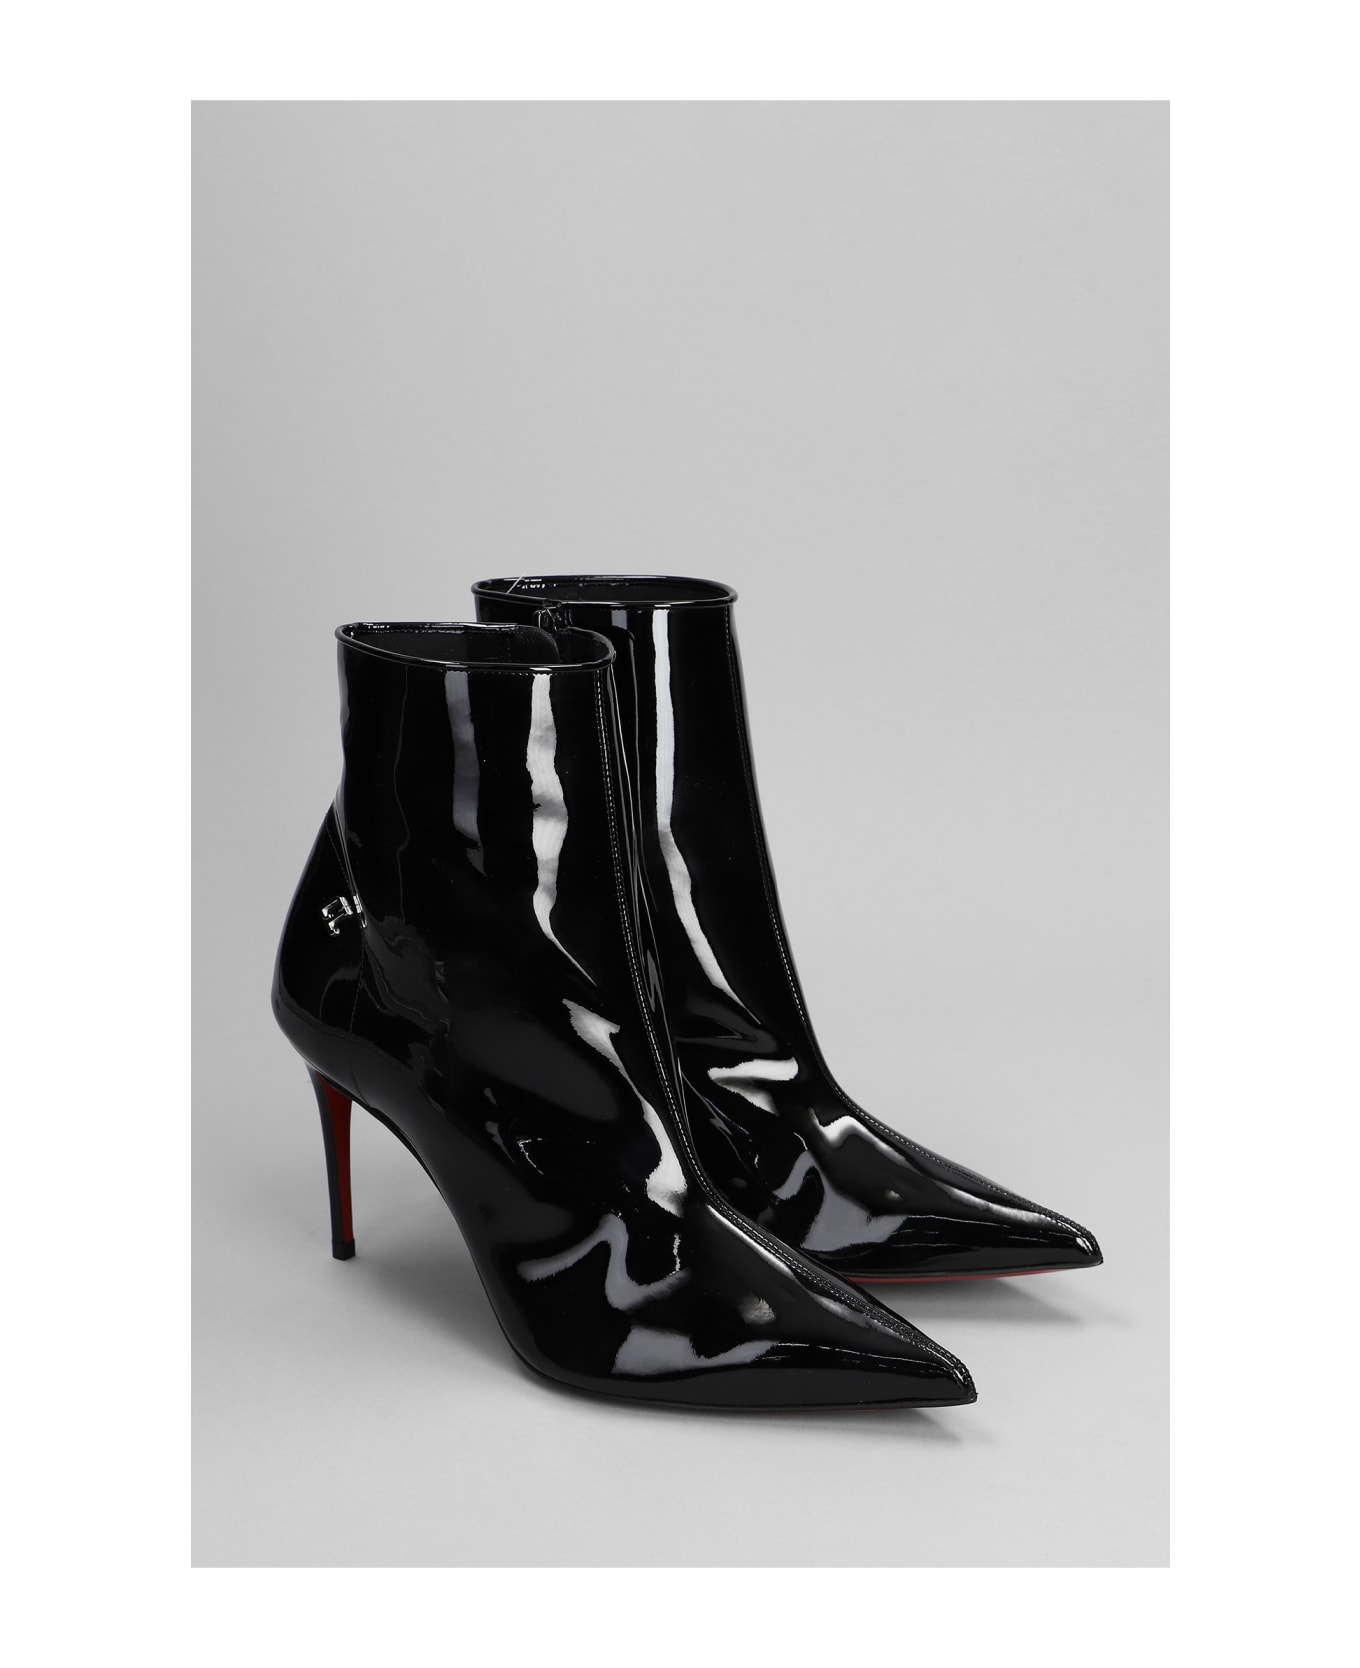 Christian Louboutin Sporty eva Booty High Heels Ankle Boots In Black Patent Leather - black